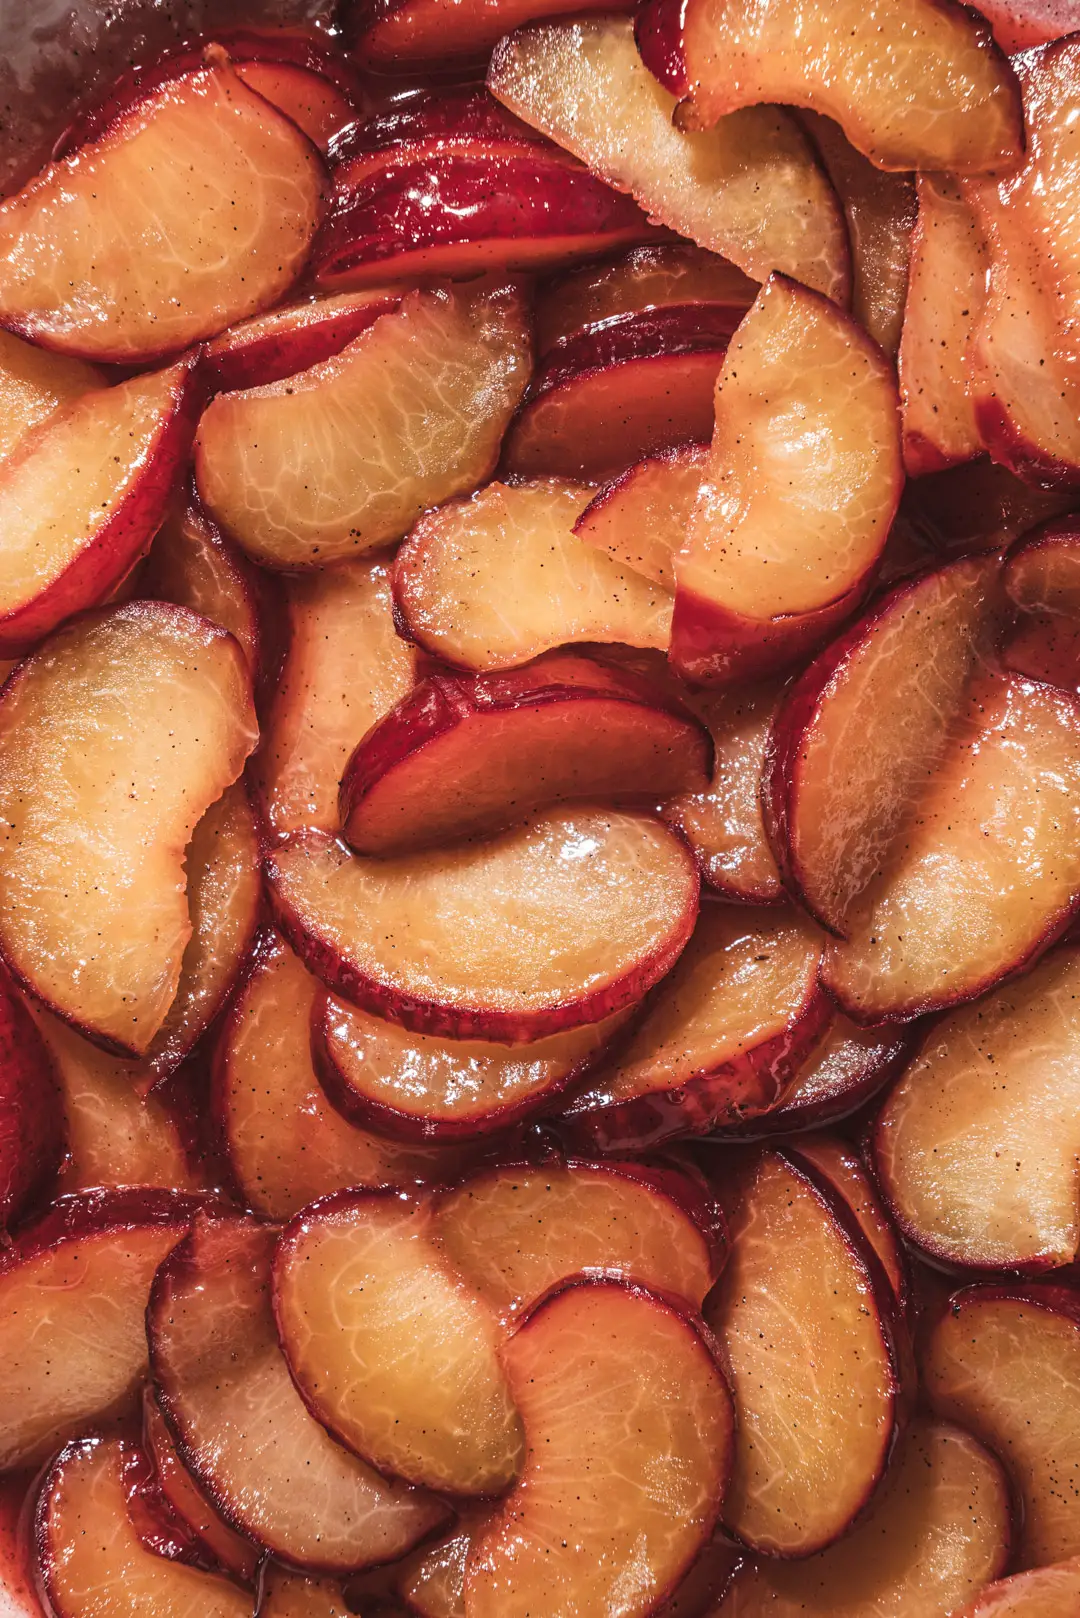 Sautéeing plums in a bit of butter, honey & vanilla is the simplest way to transform them. They become luscious, ruby tinged jewels ready to adorn your everyday eats. Enjoy them atop a simple bowl of yogurt, ice cream, oatmeal or pancakes. These simple sautéed plums will make you reconsider simply eating a plum out of hand.